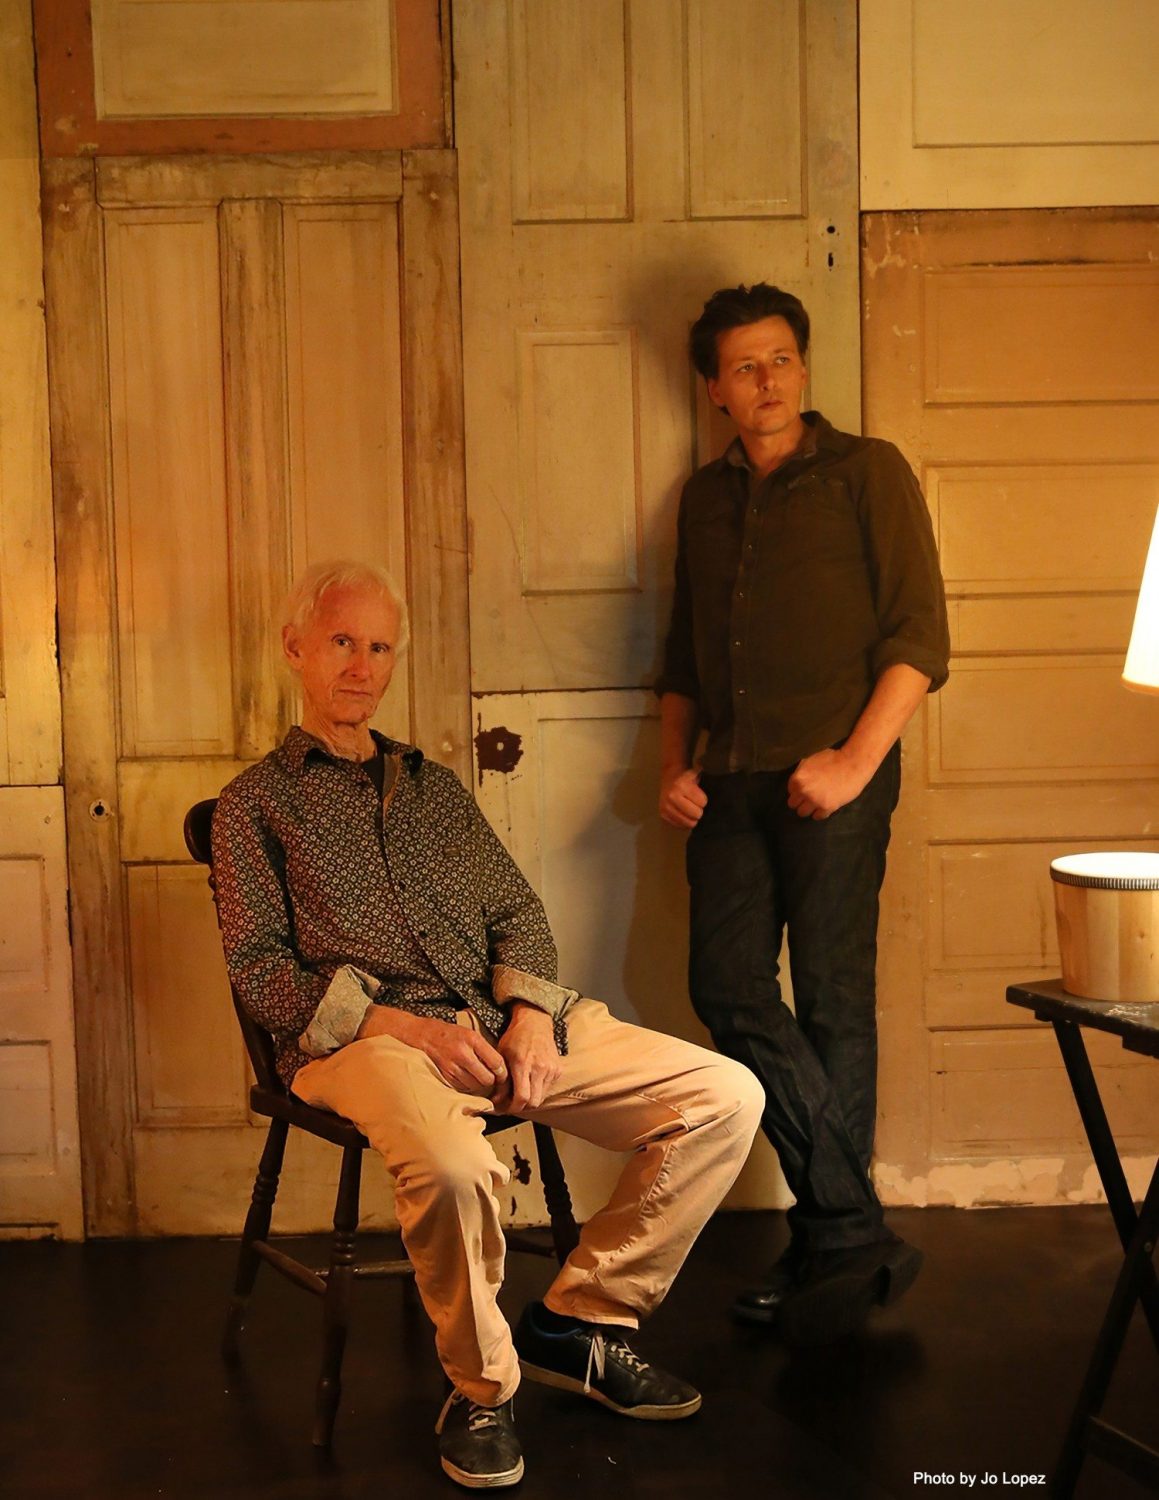 Robby Krieger talks Sept. 25 show at Highline Ballroom, The Doors, New York and more